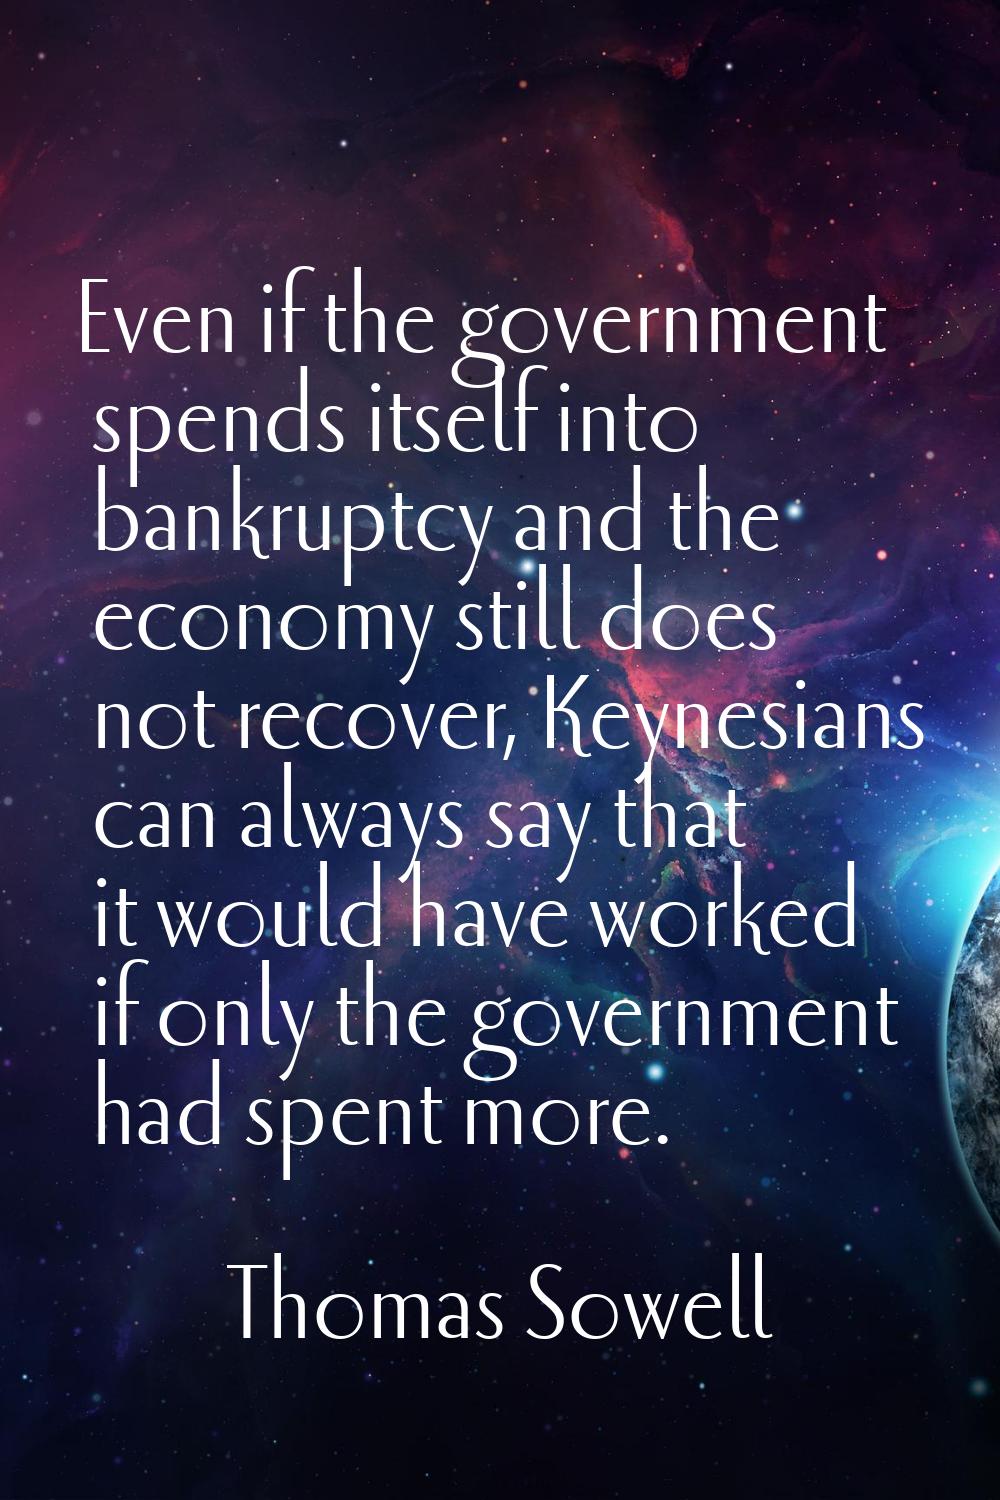 Even if the government spends itself into bankruptcy and the economy still does not recover, Keynes